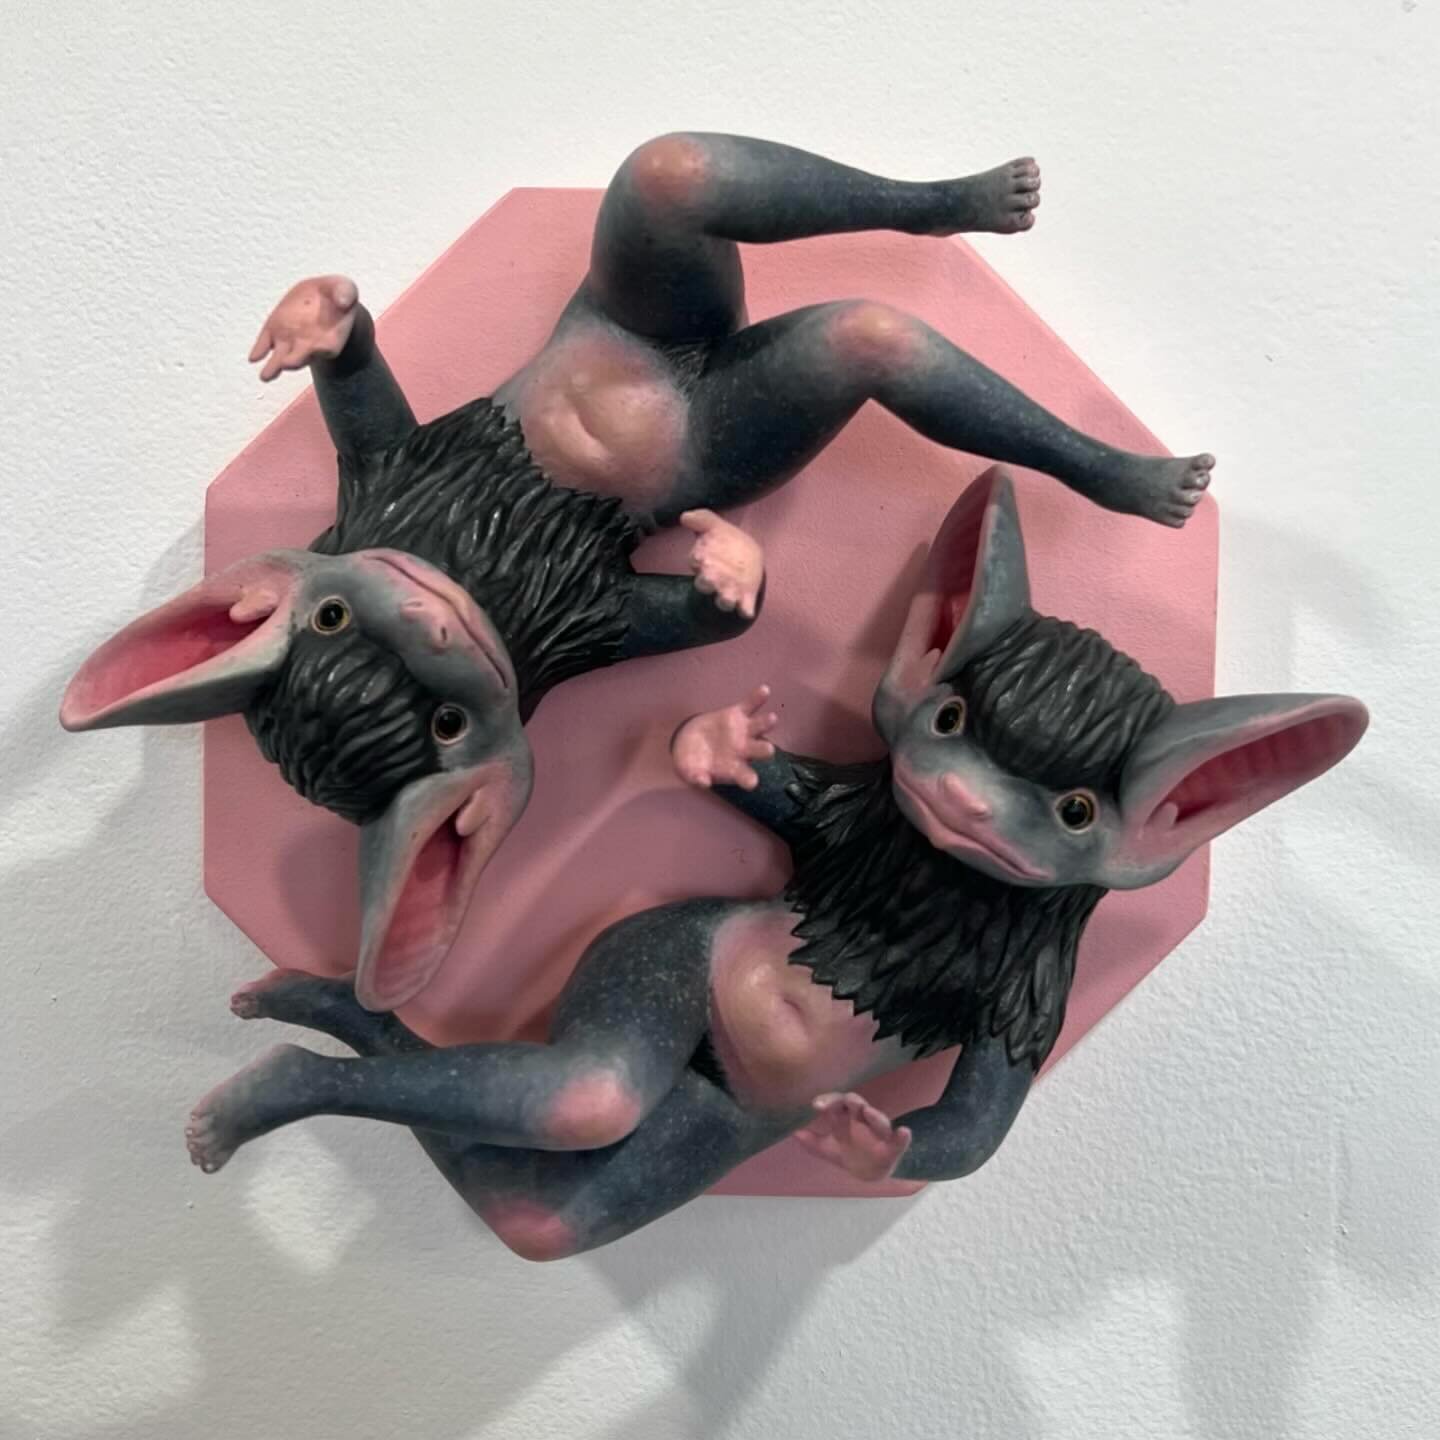 The ceramic show at Iridian Gallery is one of the most ambitious sculpture exhibitions we&rsquo;ve ever mounted. Every work in this show is exceptional. Please join us at Iridian as we give space to queer, trans, and BIPOC voices in ceramics during t